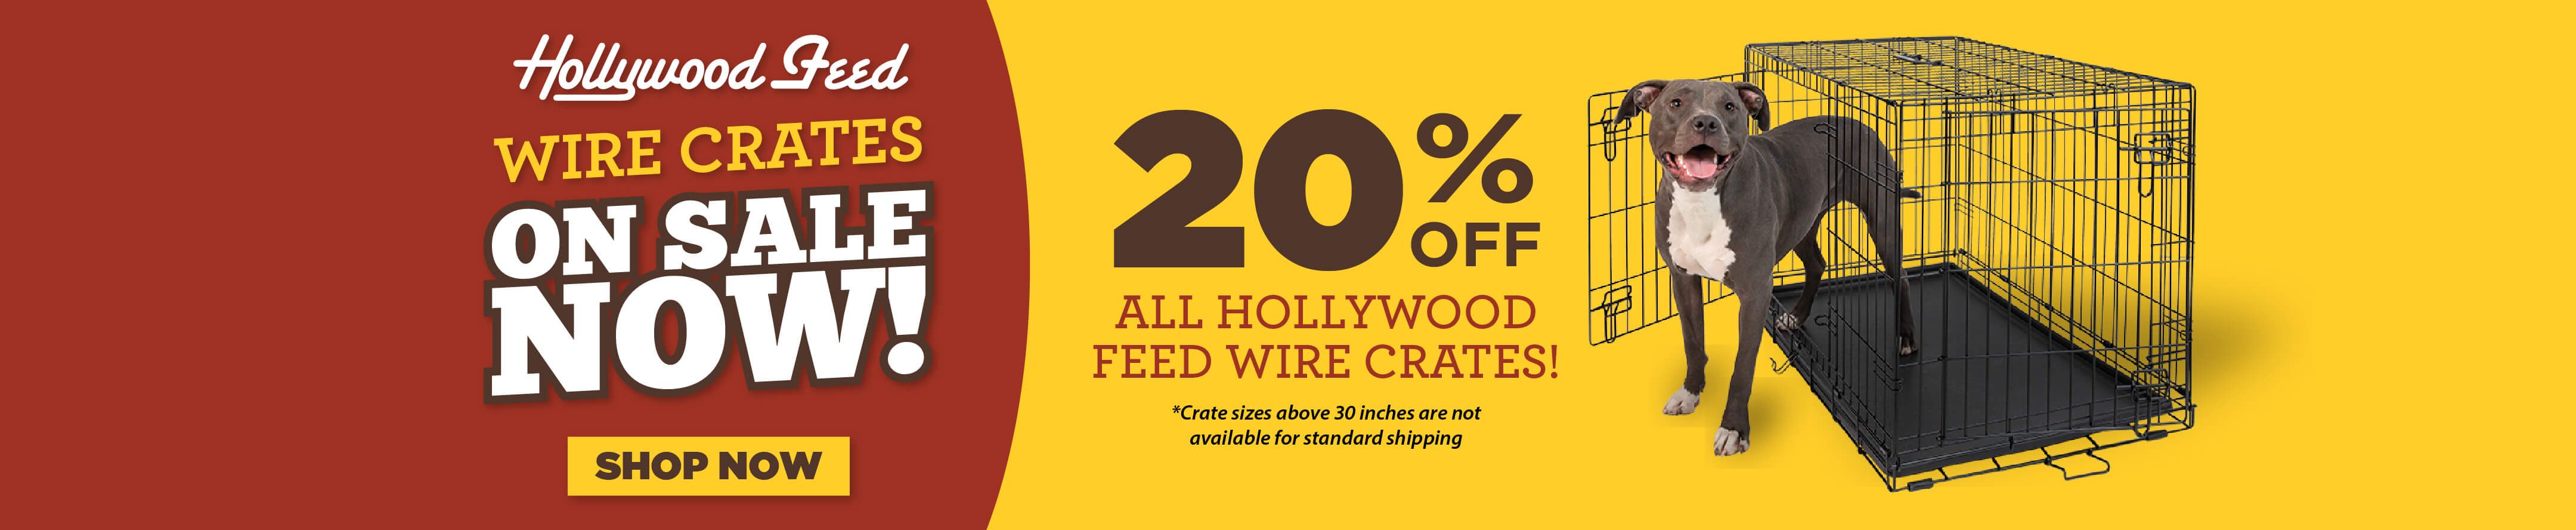 20% Off All Hollywood Feed Wire Crates! *Crates sizes above 30 inches are not available for standard shipping.